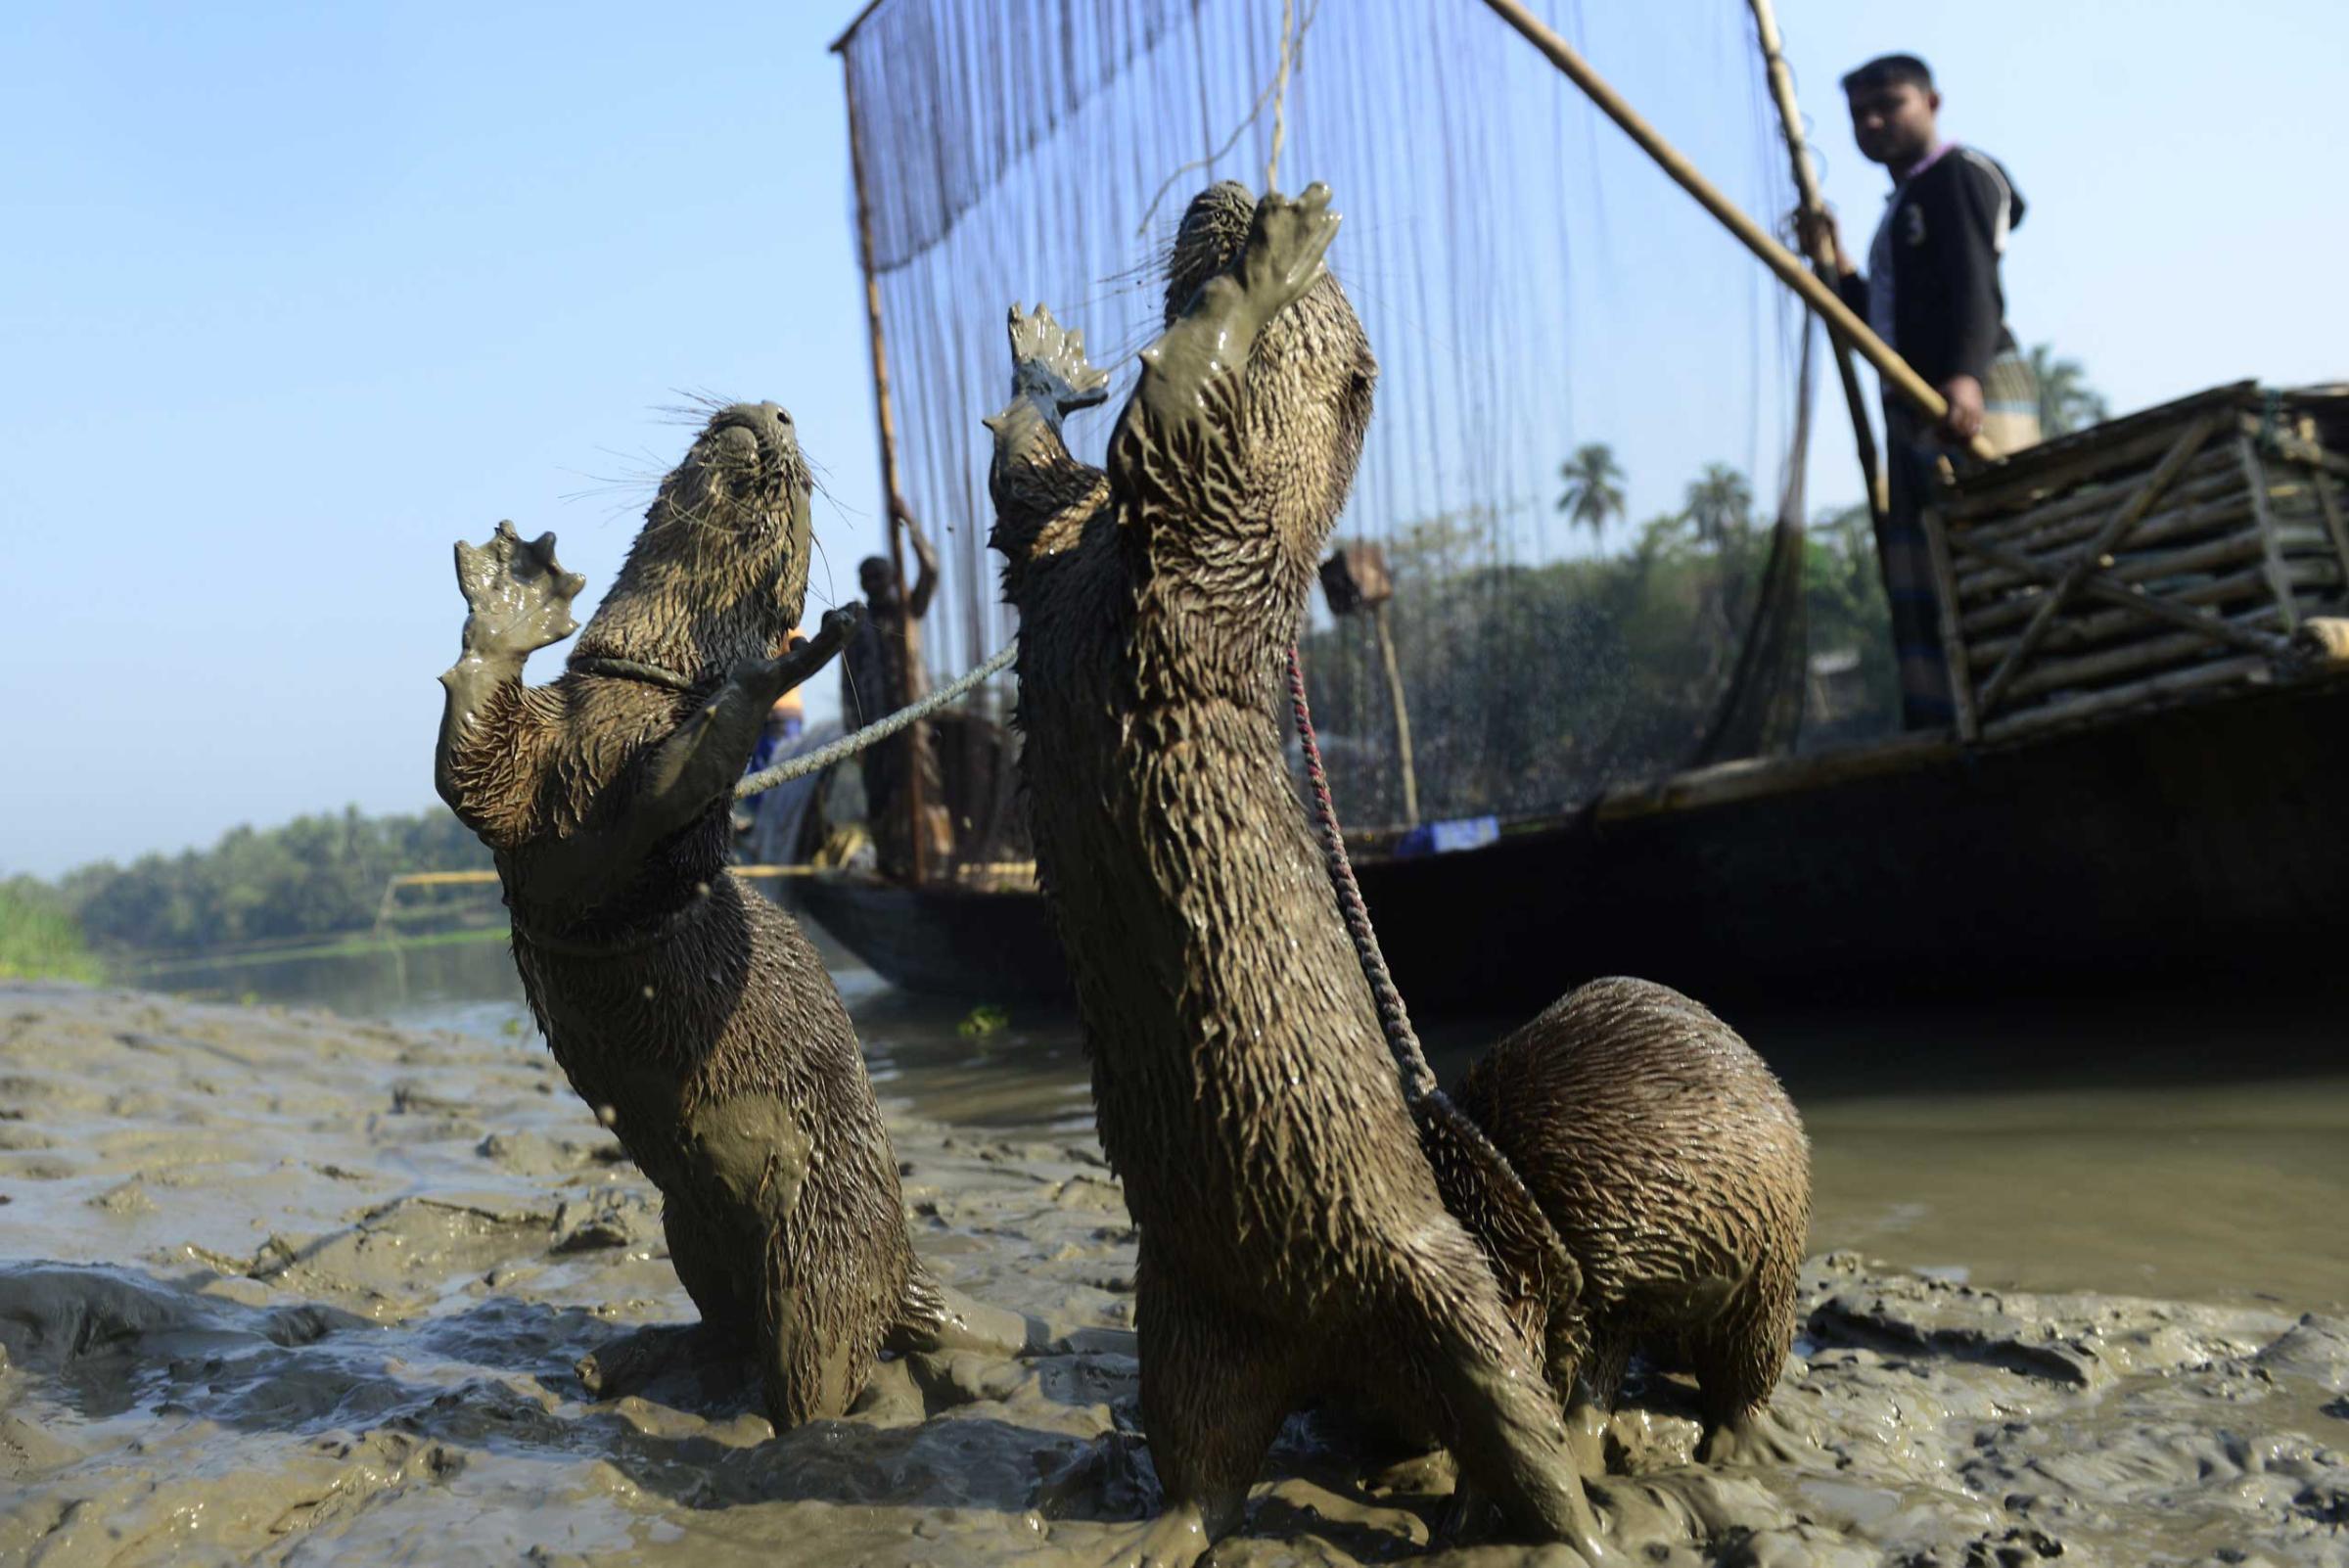 Fisherman feed their otters as they catch fish in Narail, Bangladesh, March 11, 2014.